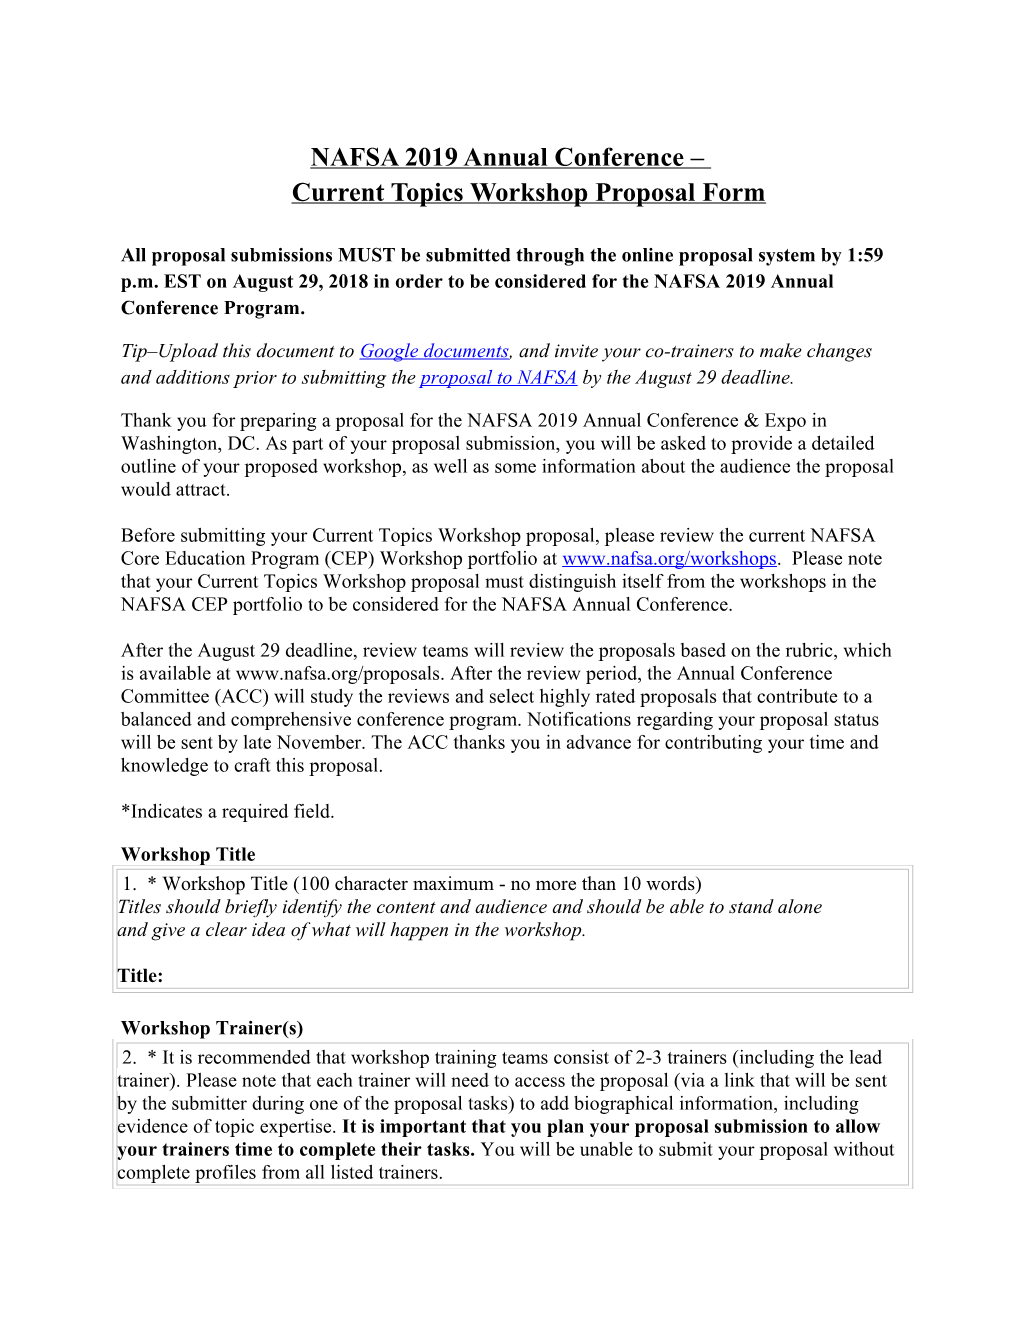 NAFSA 2019Annual Conference Current Topics Workshop Proposal Form